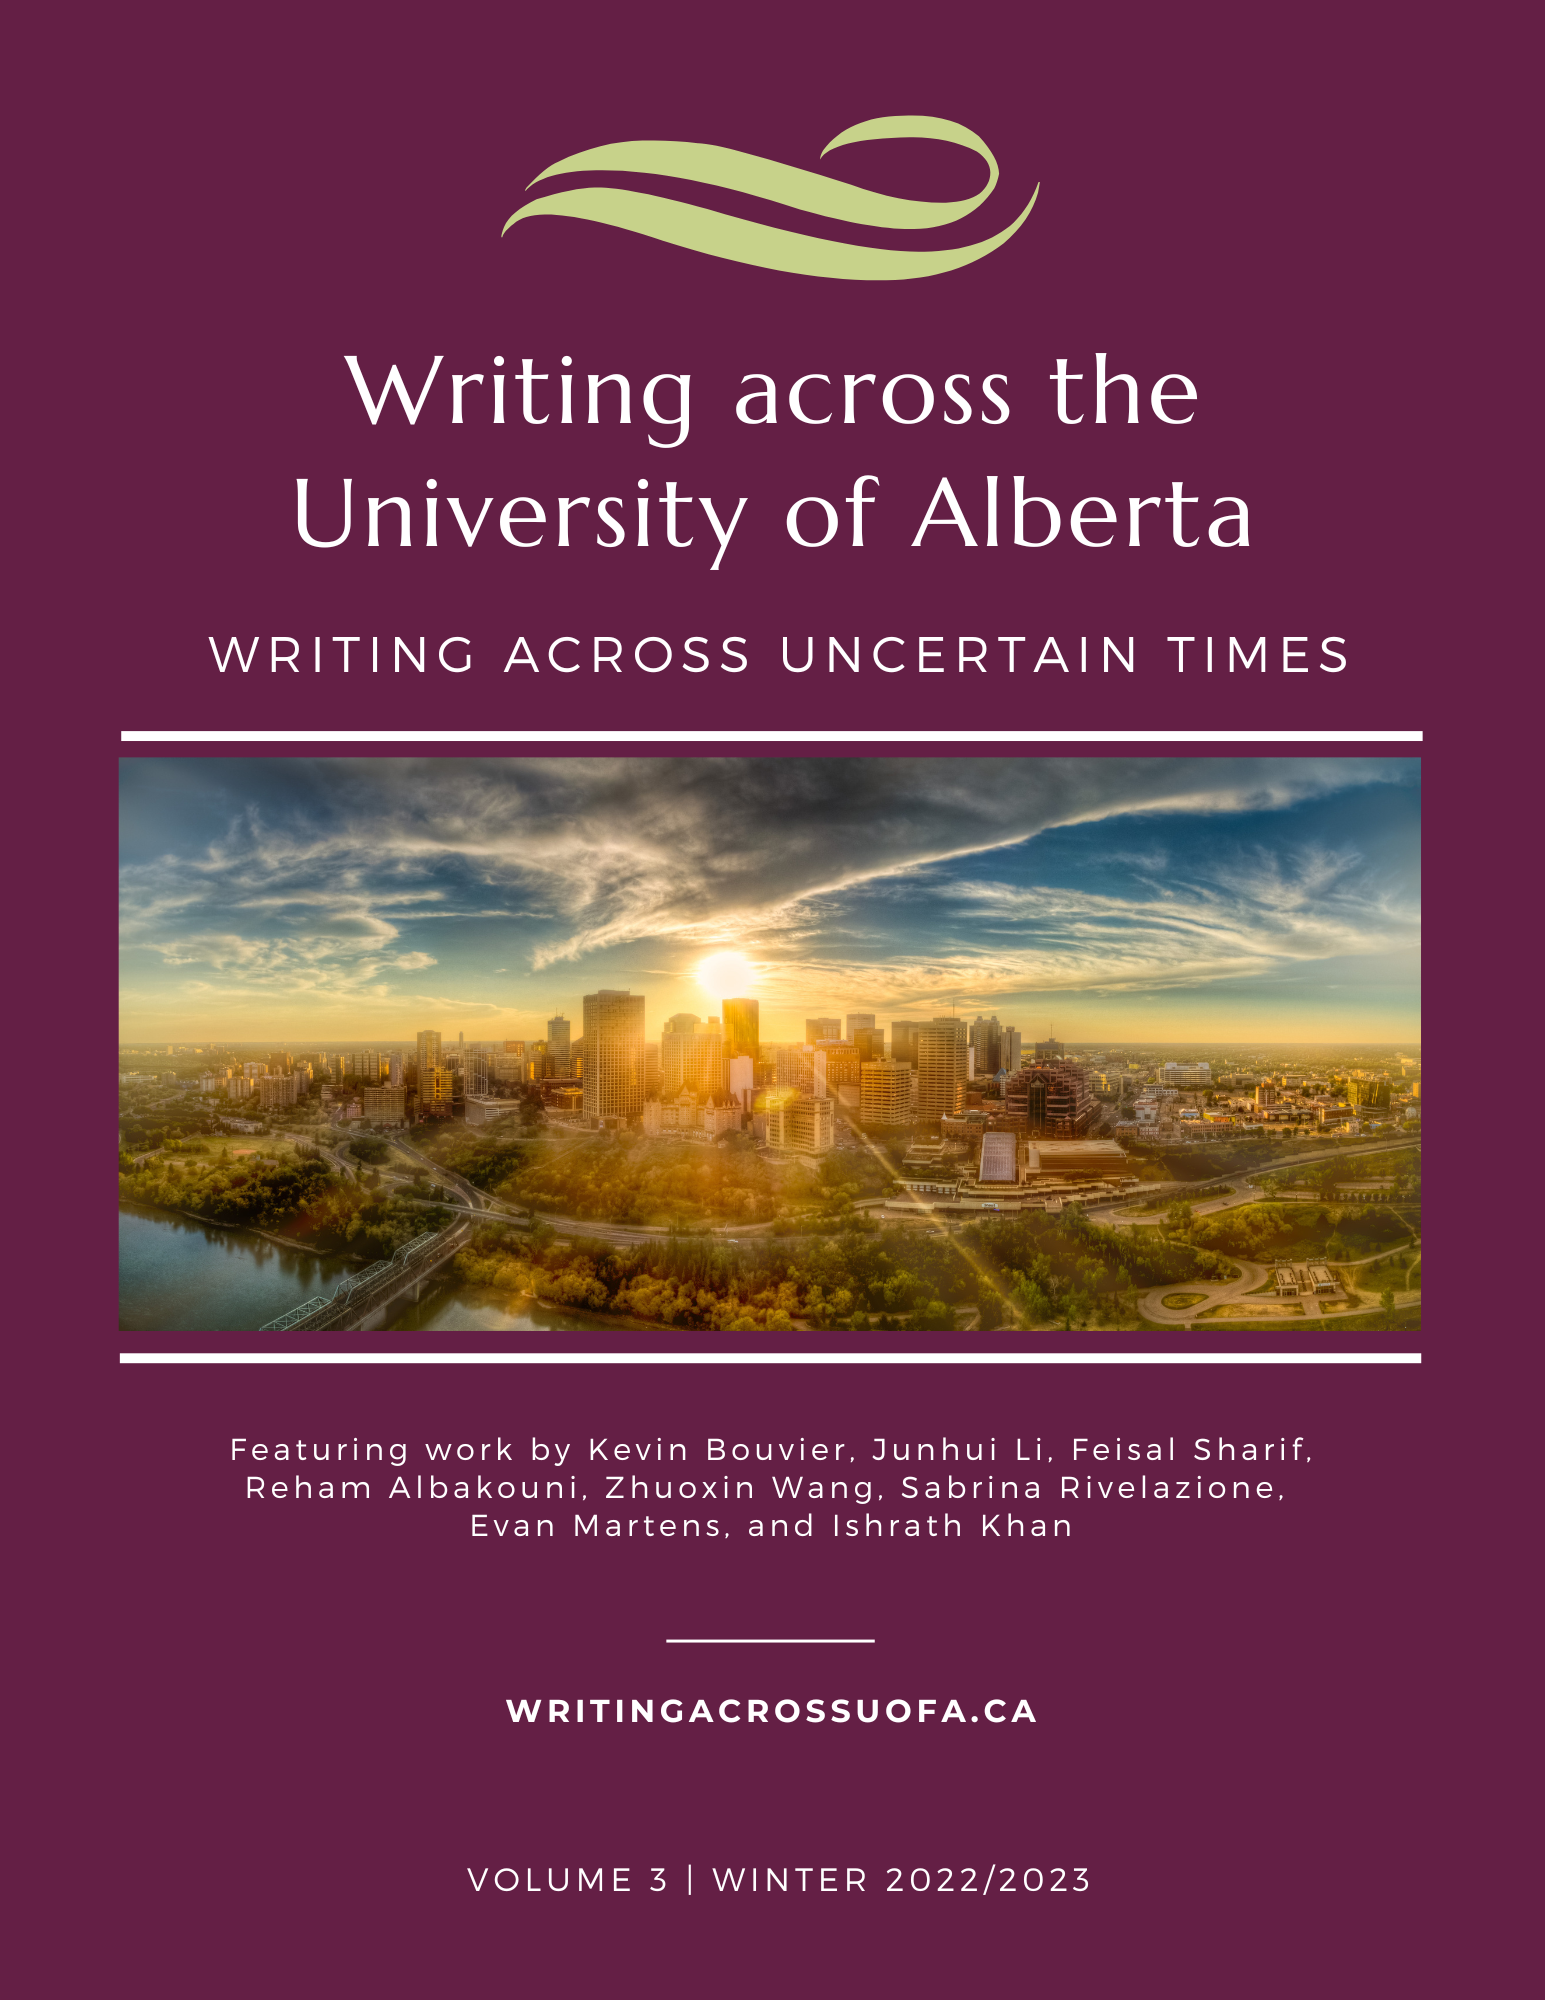 Cover image for Volume 3 of Writing across the University of Alberta. Feature scenic image of Edmonton and names of authors